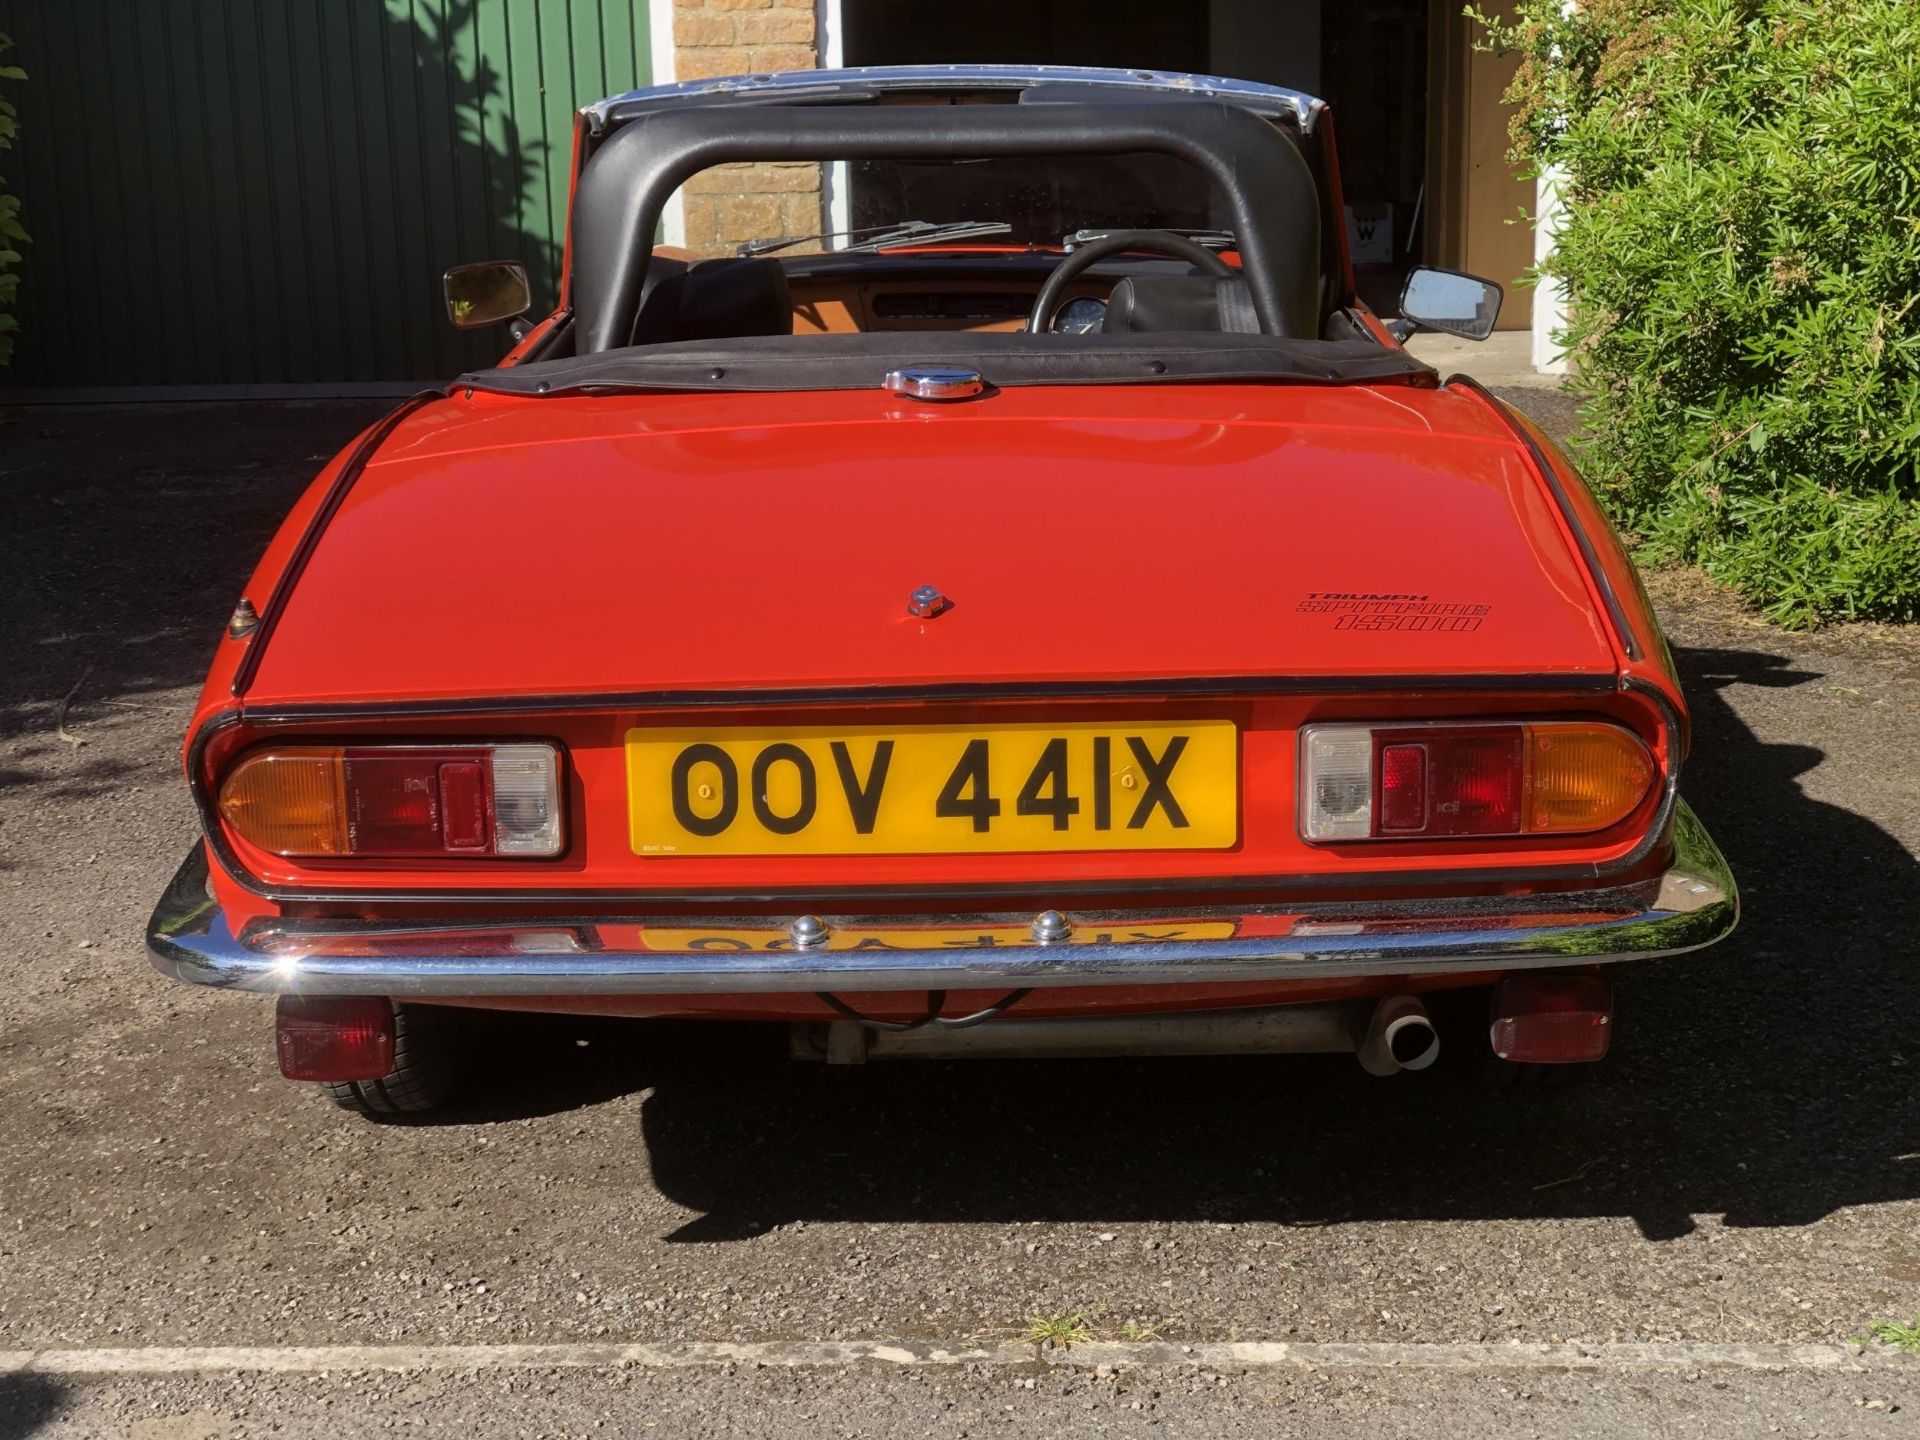 1981 Triumph Spitfire 1500 Registration number OOV 441X Chassis number TFADW1AT009713 Engine - Image 3 of 57